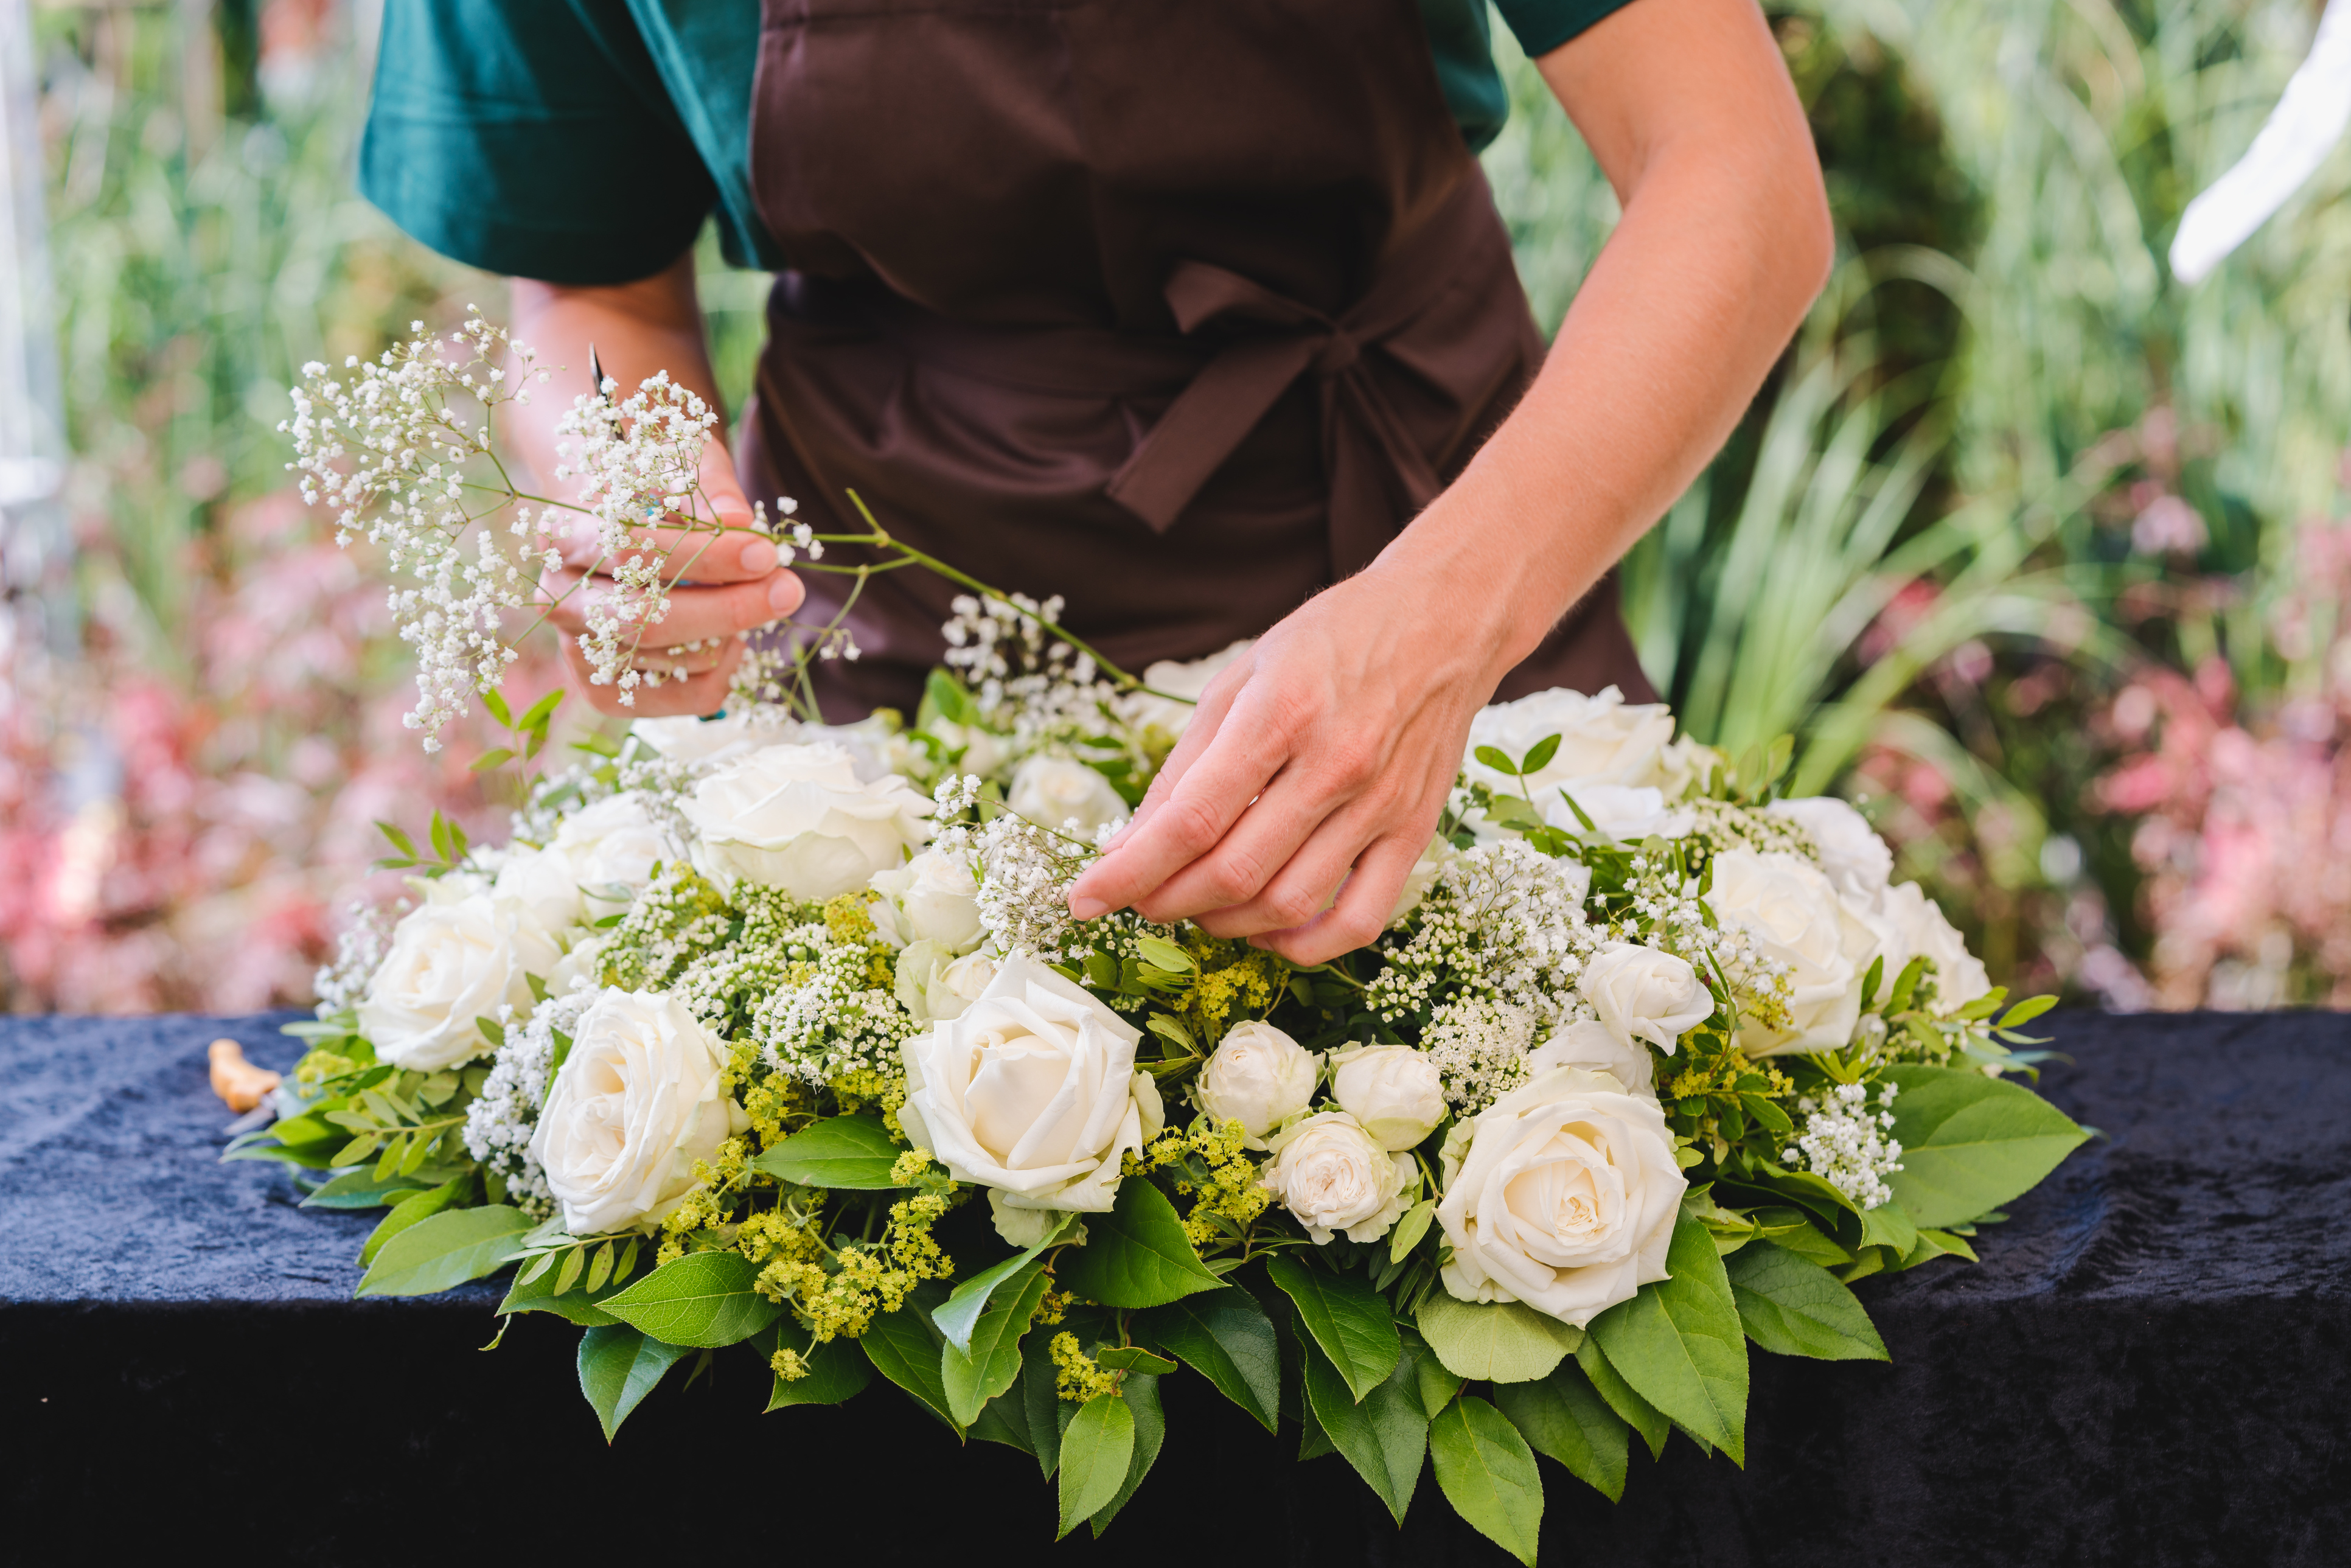 Funeral Flowers Etiquette: Is buying flowers for a funeral appropriate? Discover where to buy funeral flowers.
